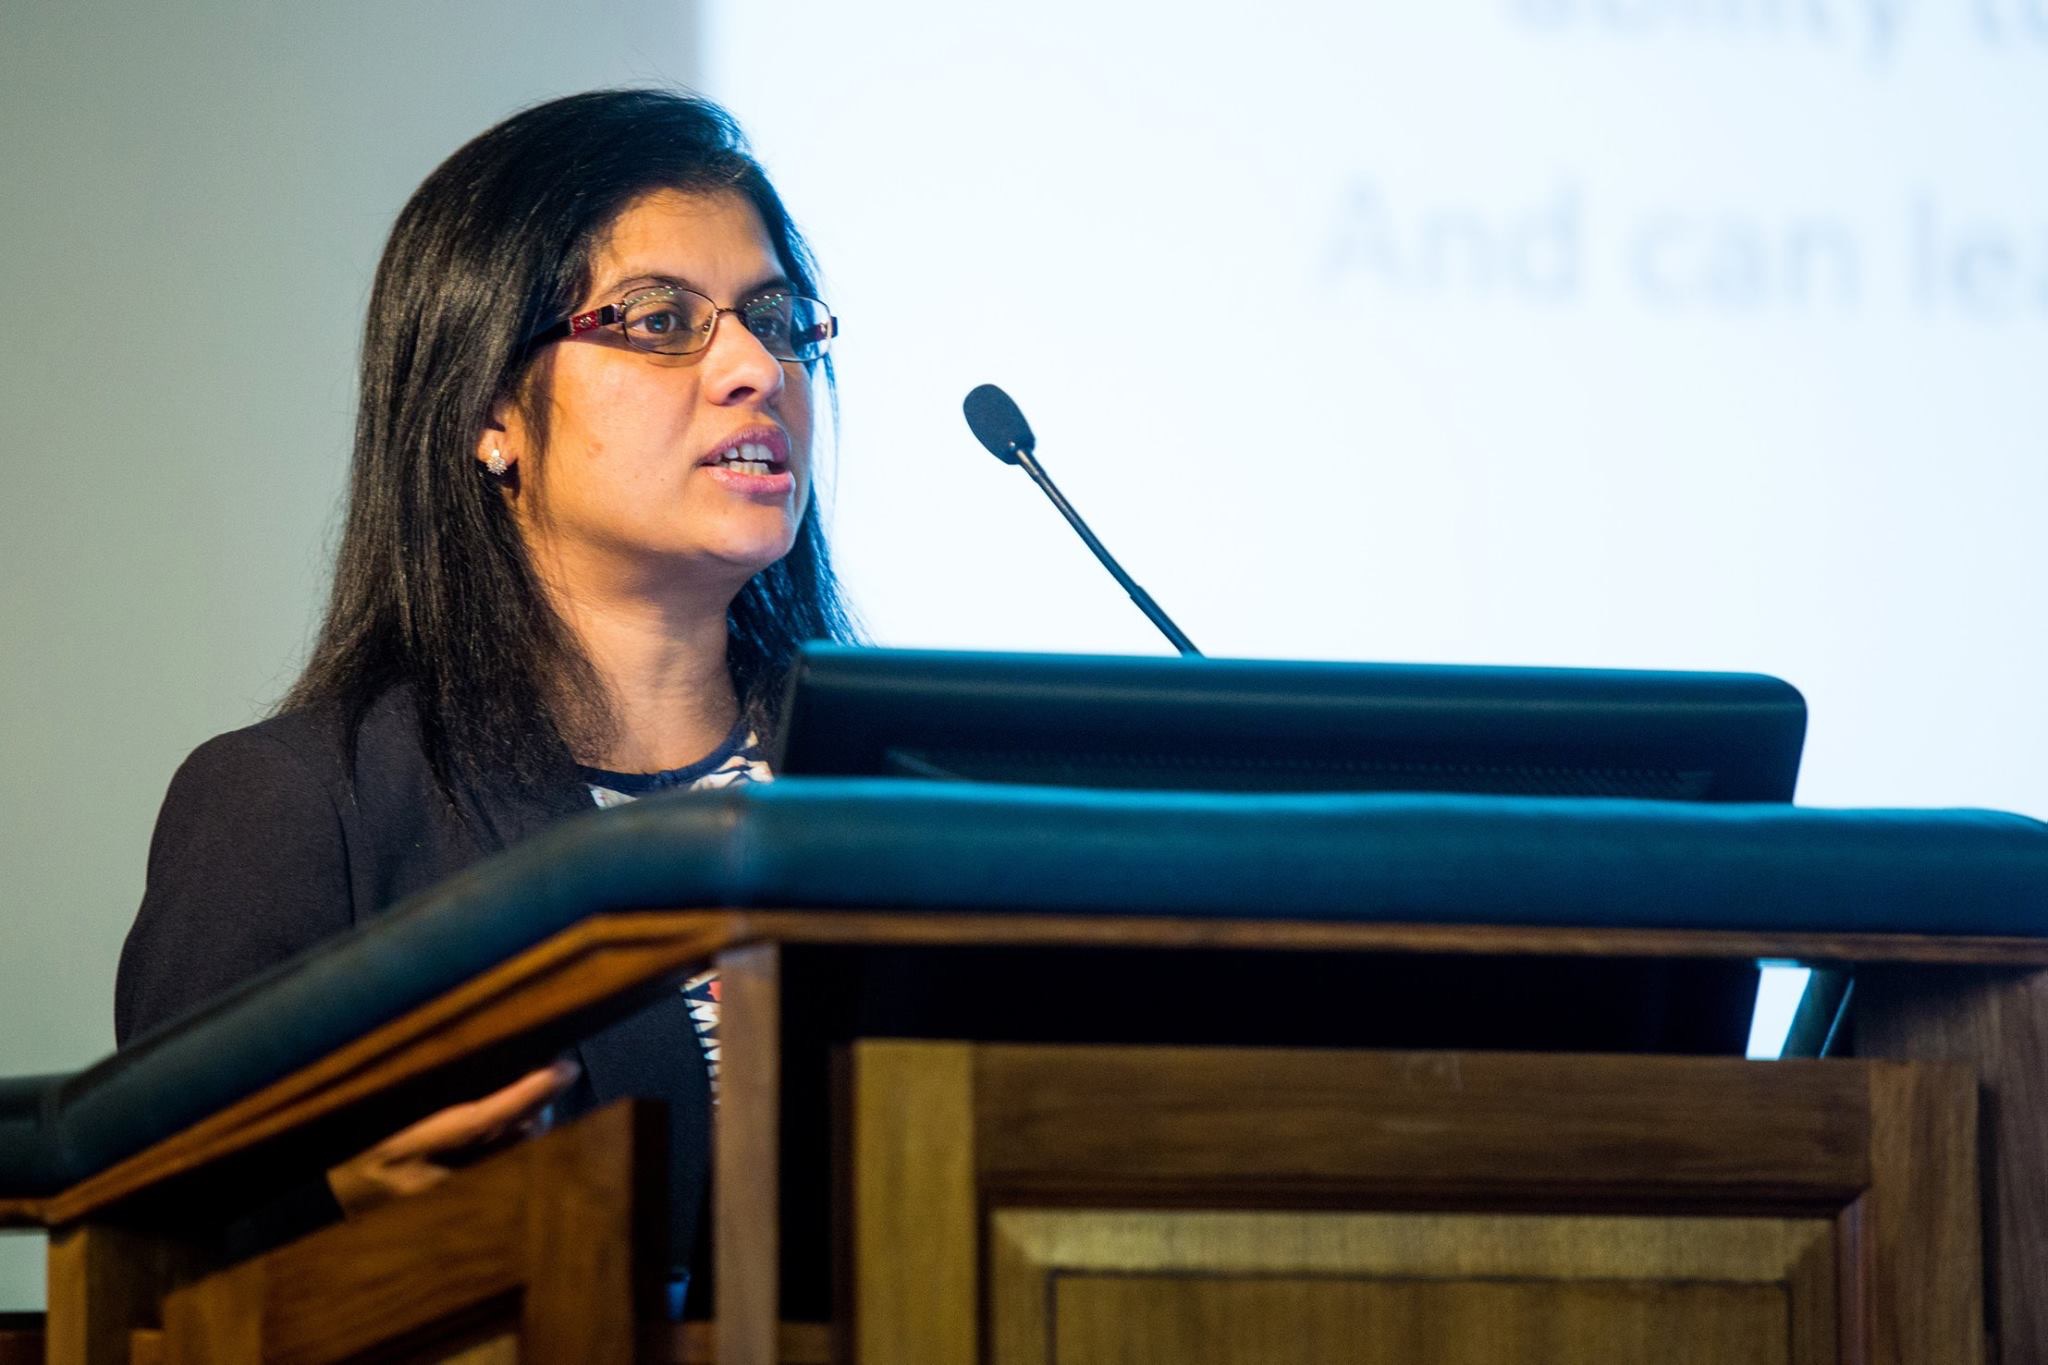 Parveen Ali presents her project at the Mary Seacole awards London 22 October 2015